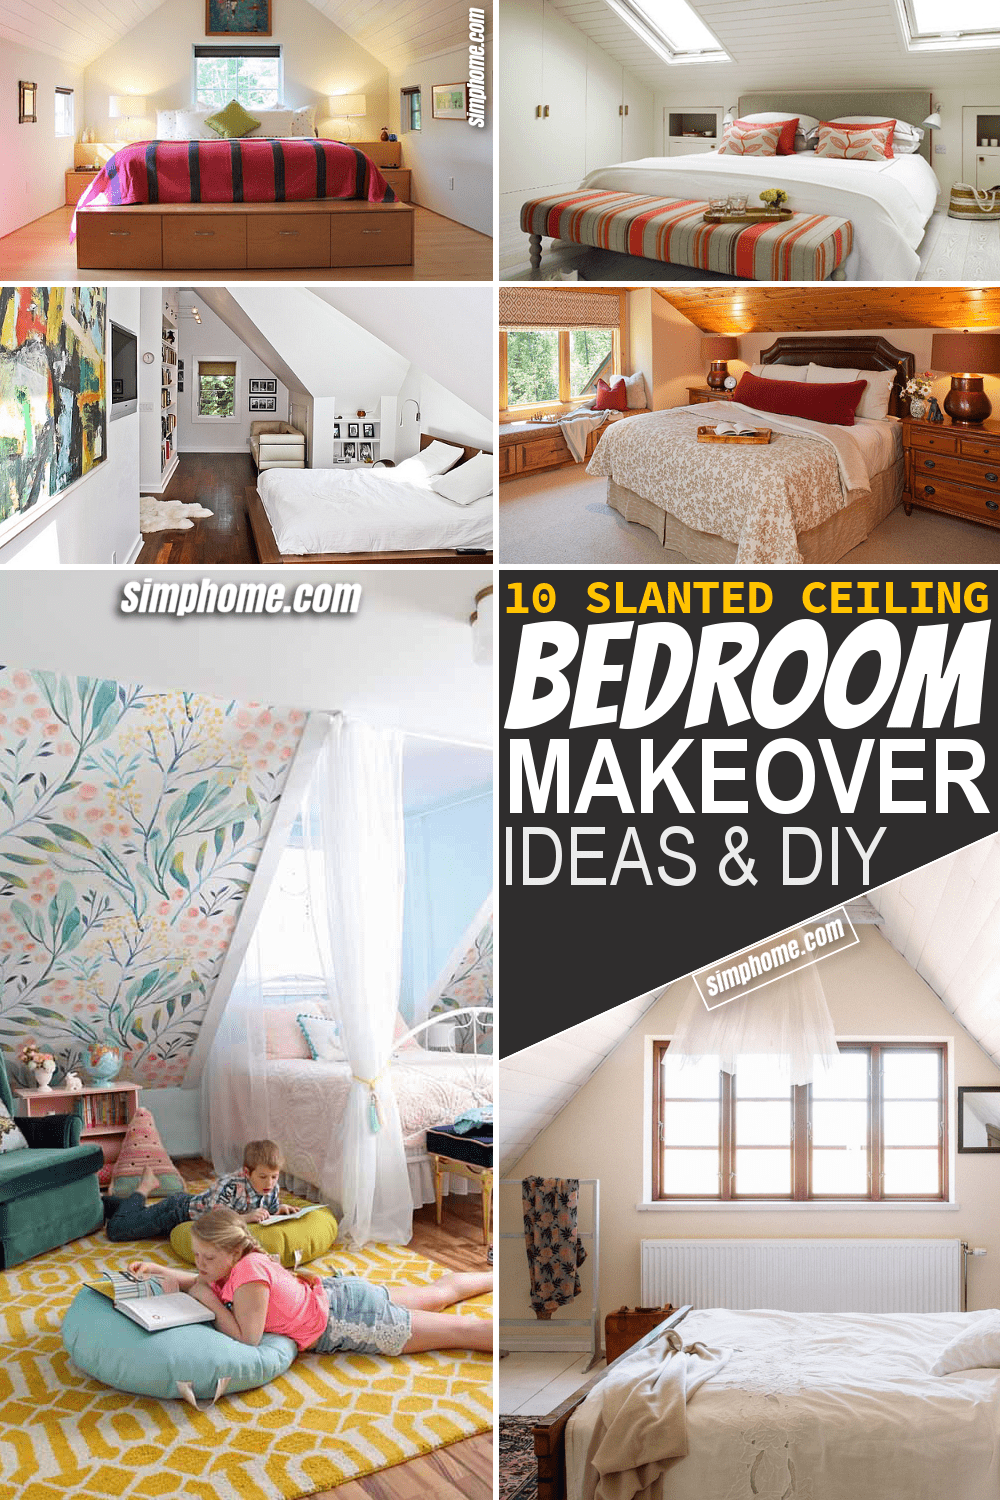 Simphome.com 10 Slanted Ceiling Bedroom Makeover Ideas Featured Pinterest Image